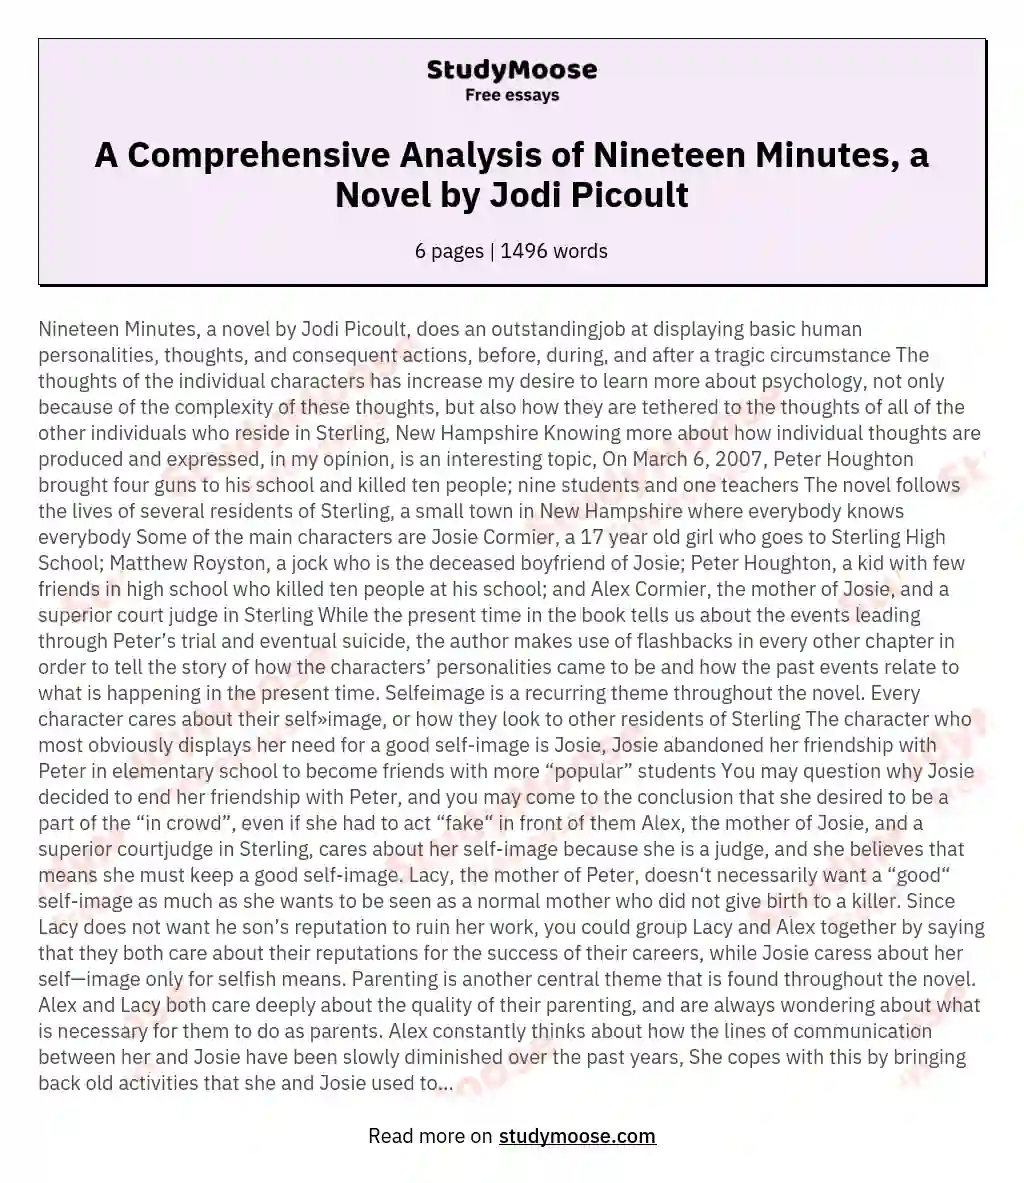 A Comprehensive Analysis of Nineteen Minutes, a Novel by Jodi Picoult essay